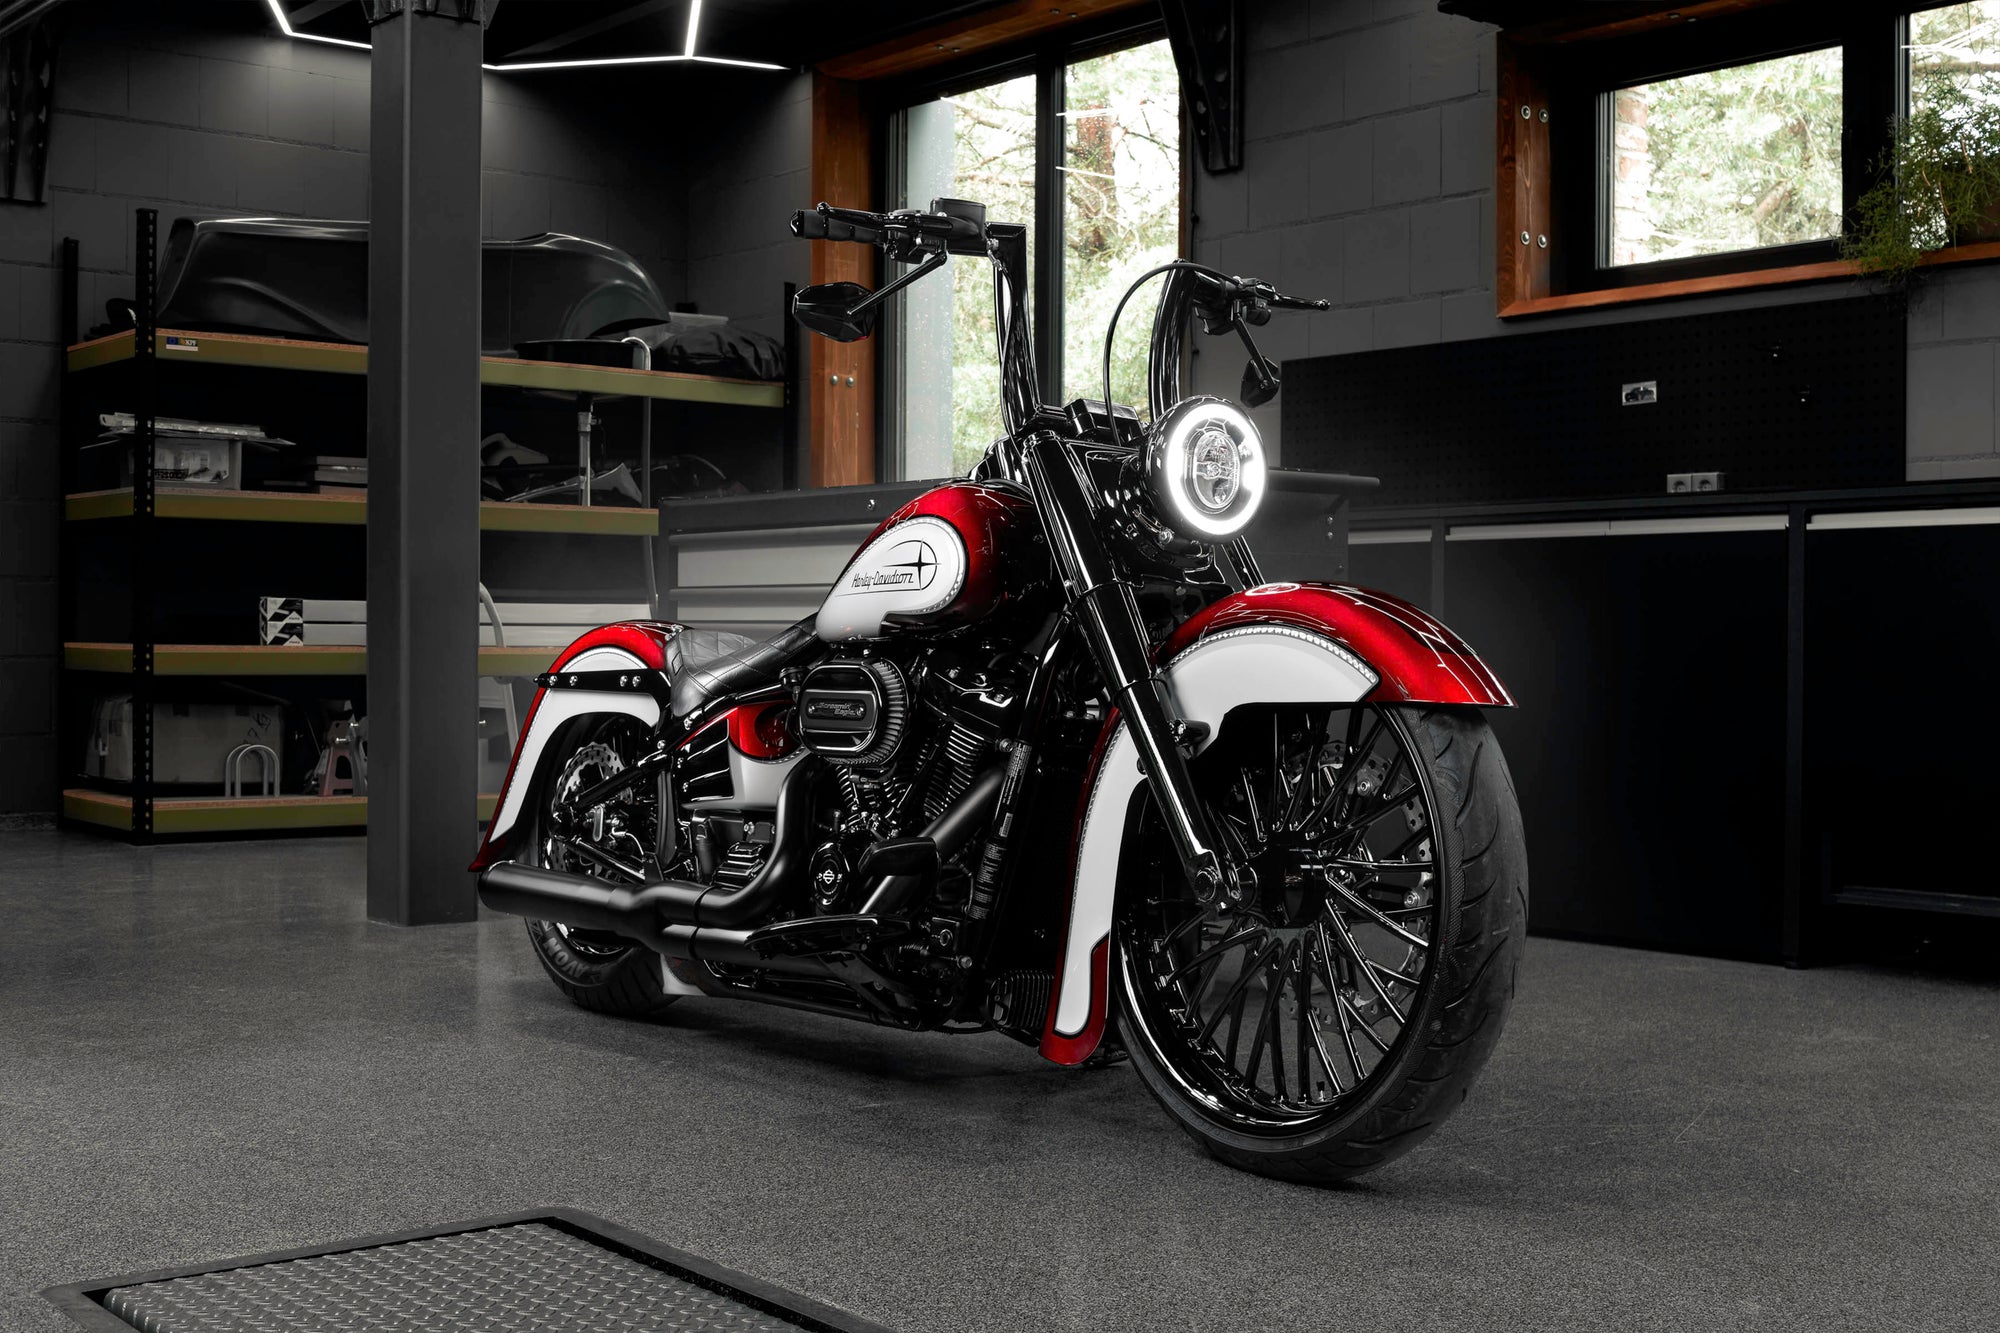 Modified Harley Davidson Heritage motorcycle with Killer Custom parts from the front in a modern bike shop